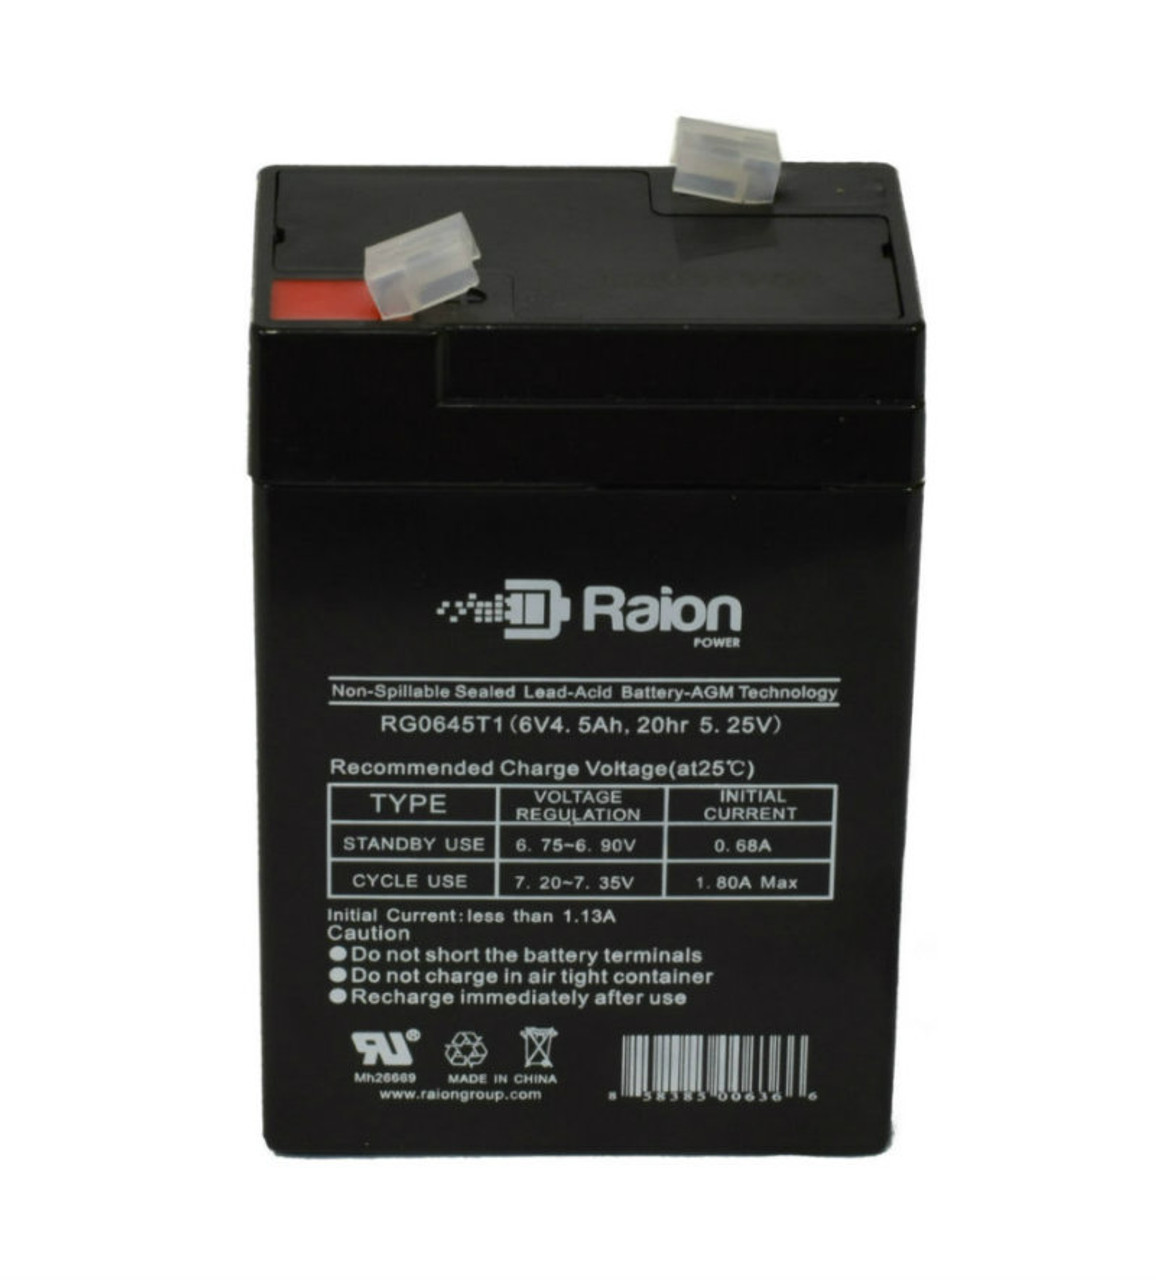 Raion Power RG0645T1 Replacement Battery Cartridge for Dorcy Spotlight 41-1083